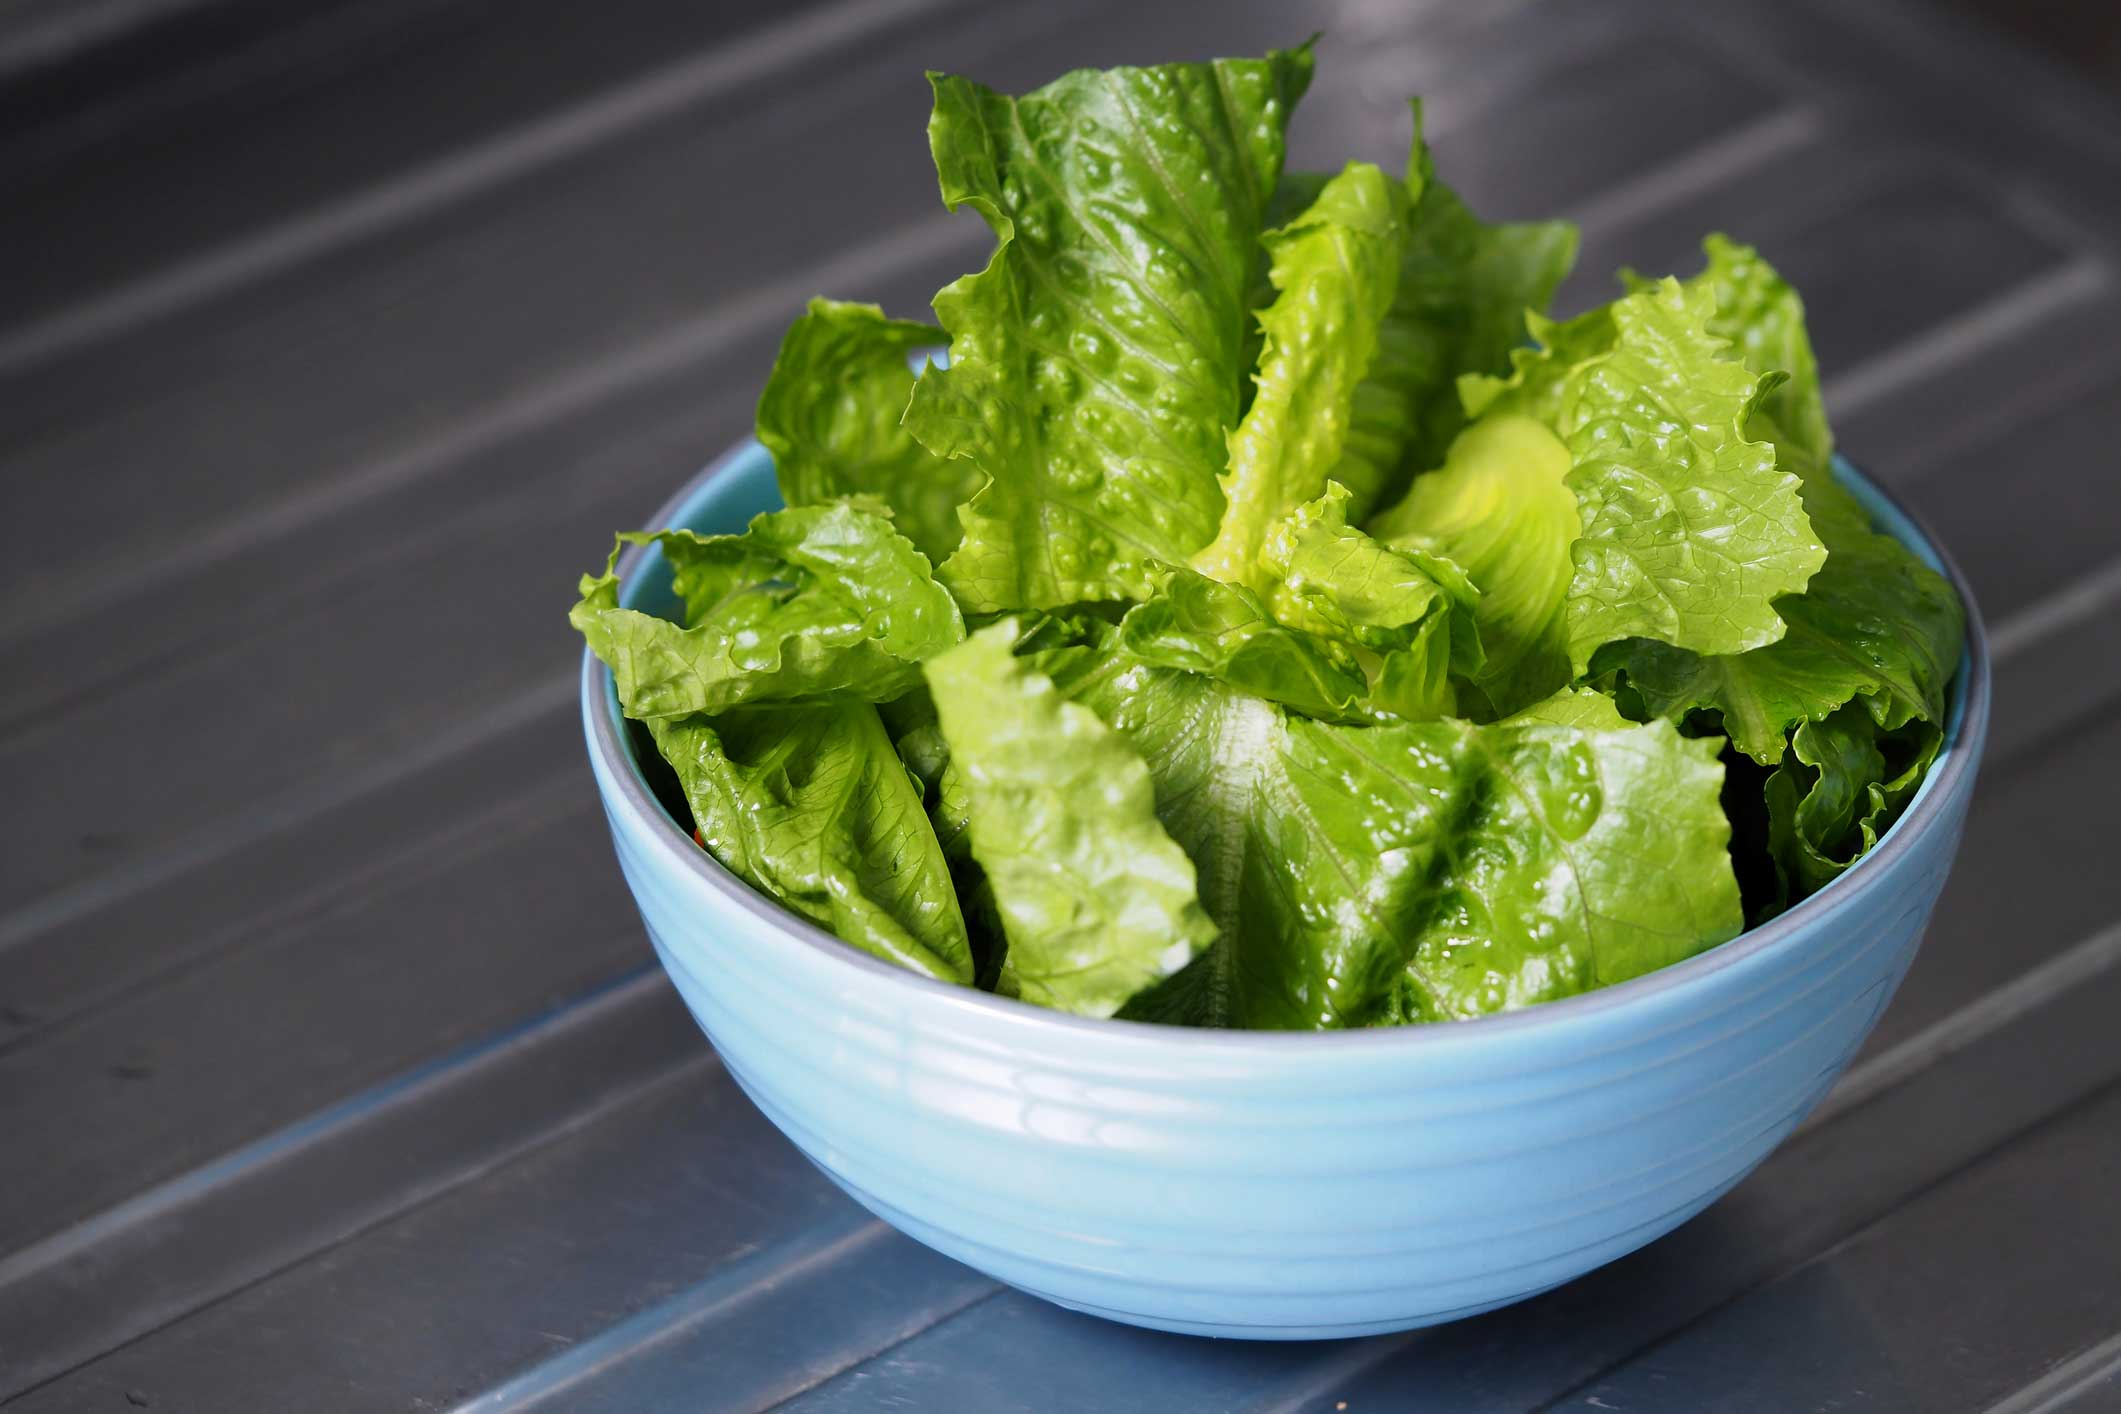 Chopped romaine lettuce in a bowl.